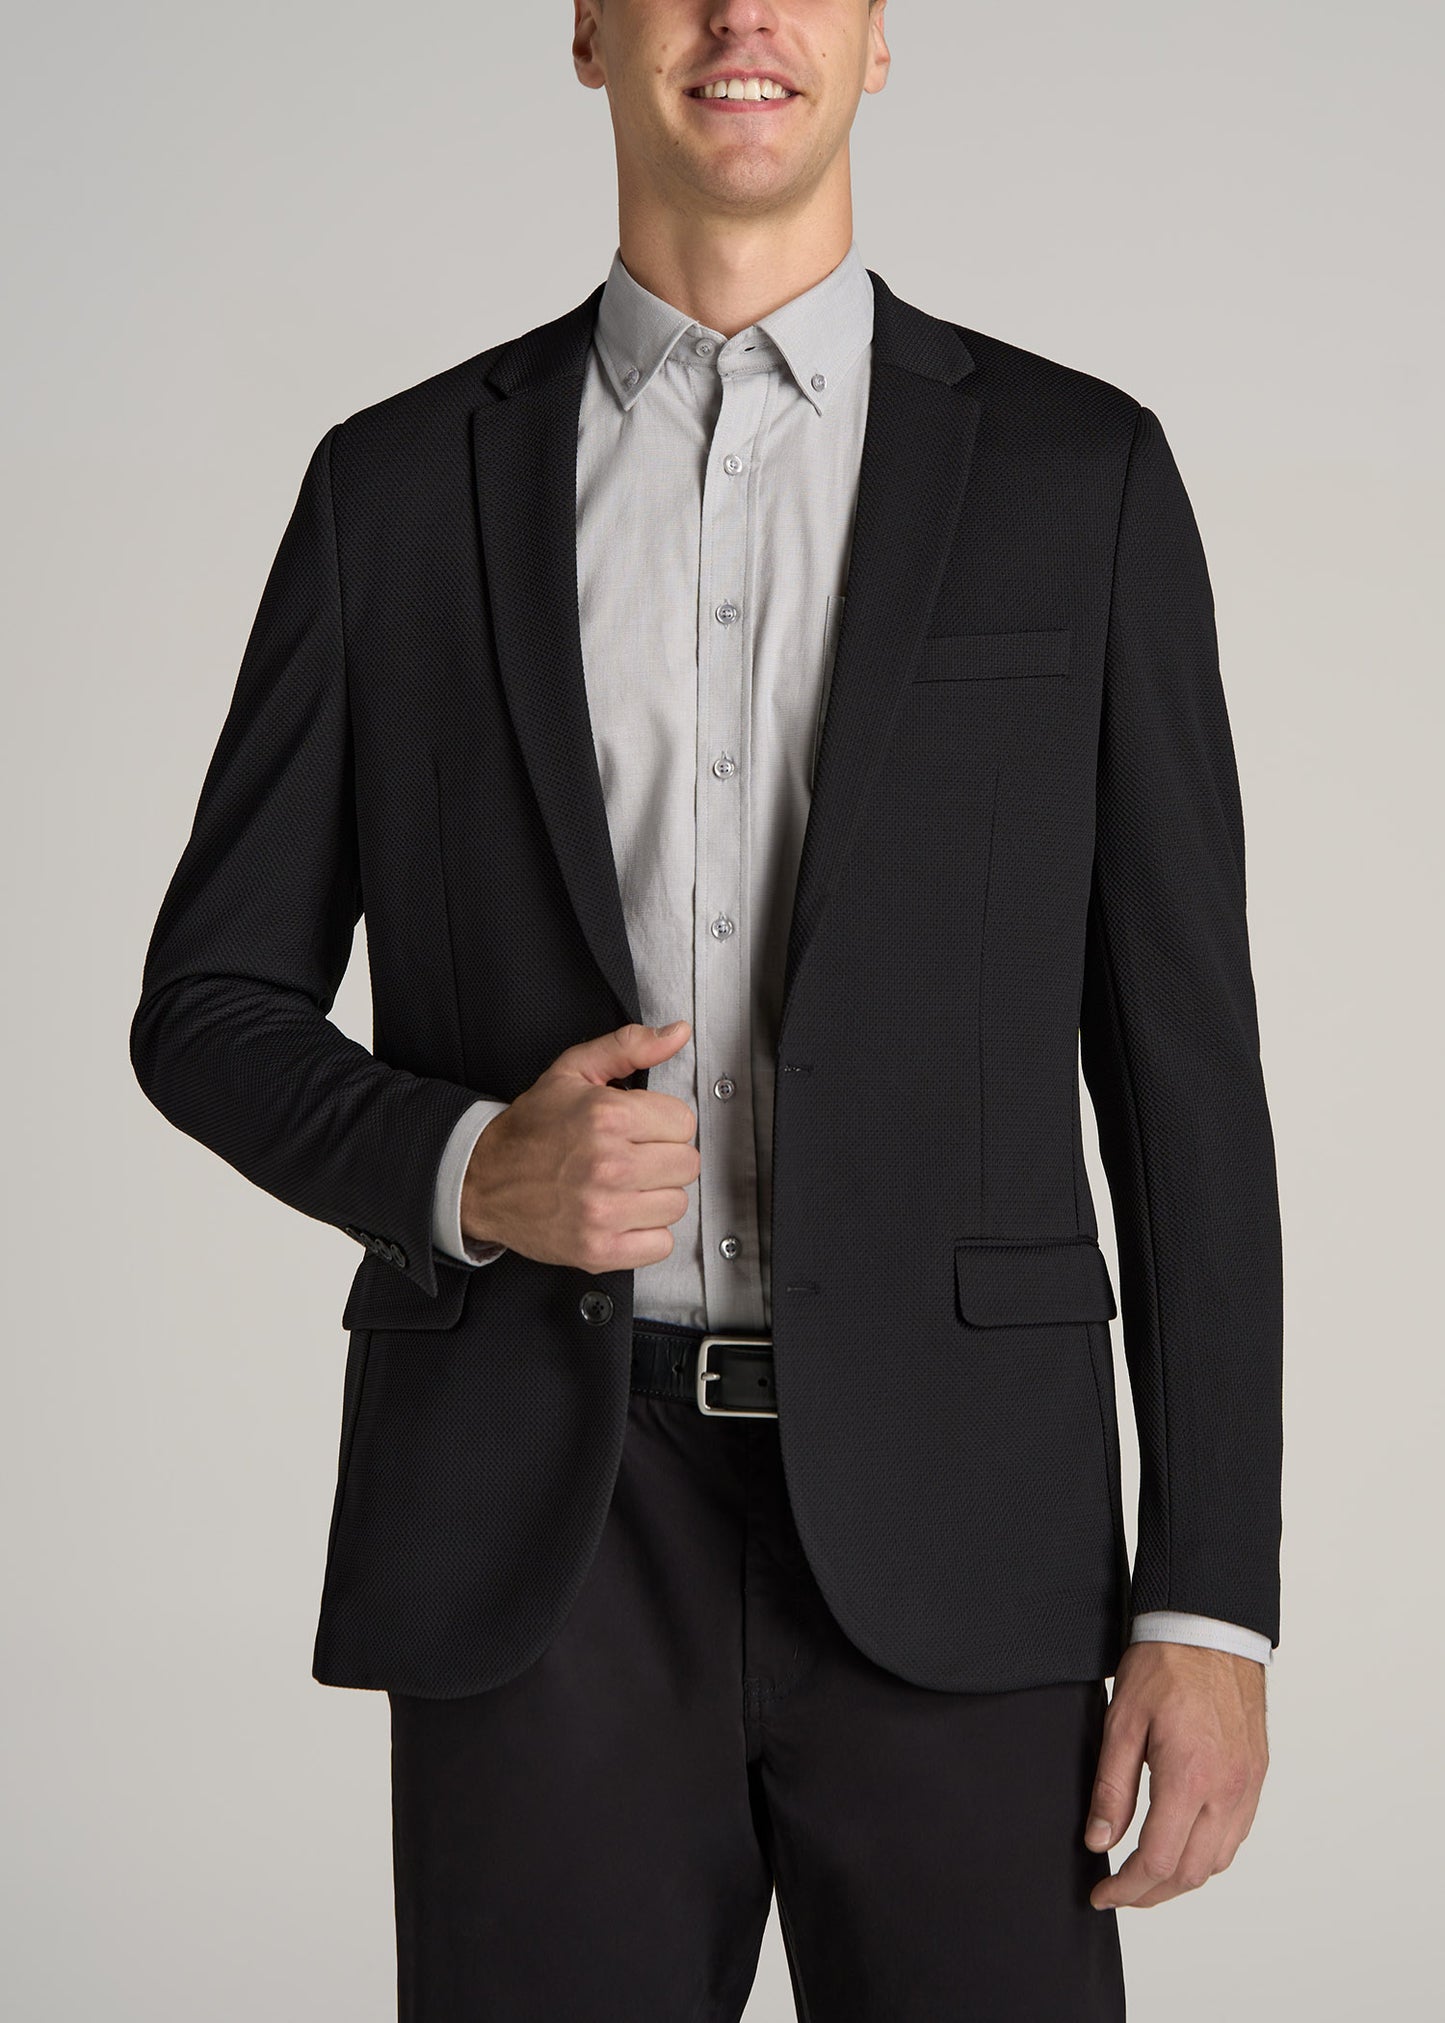 A tall man wearing American Tall's Textured Blazer for Tall Men in Black.